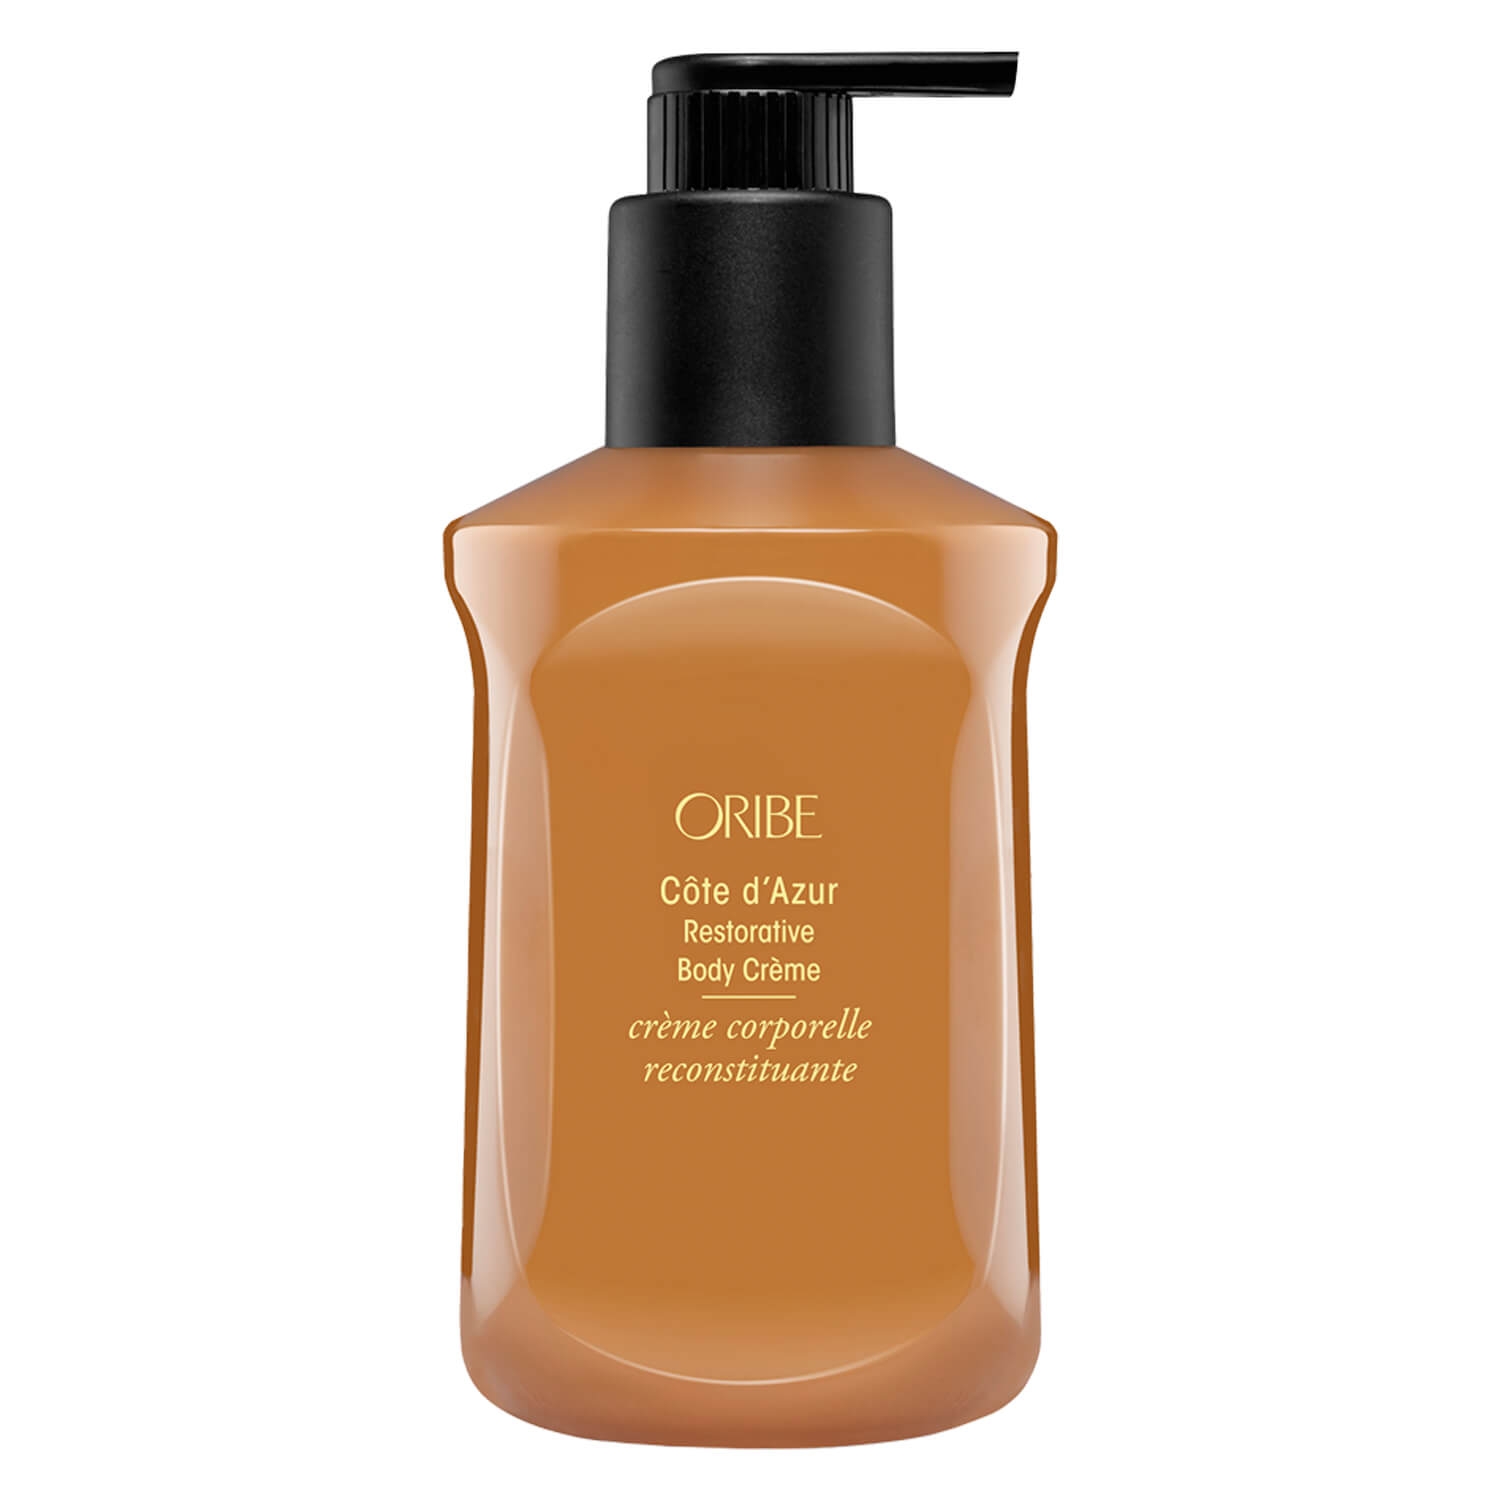 Product image from Côte d'Azur Restorative Body Creme